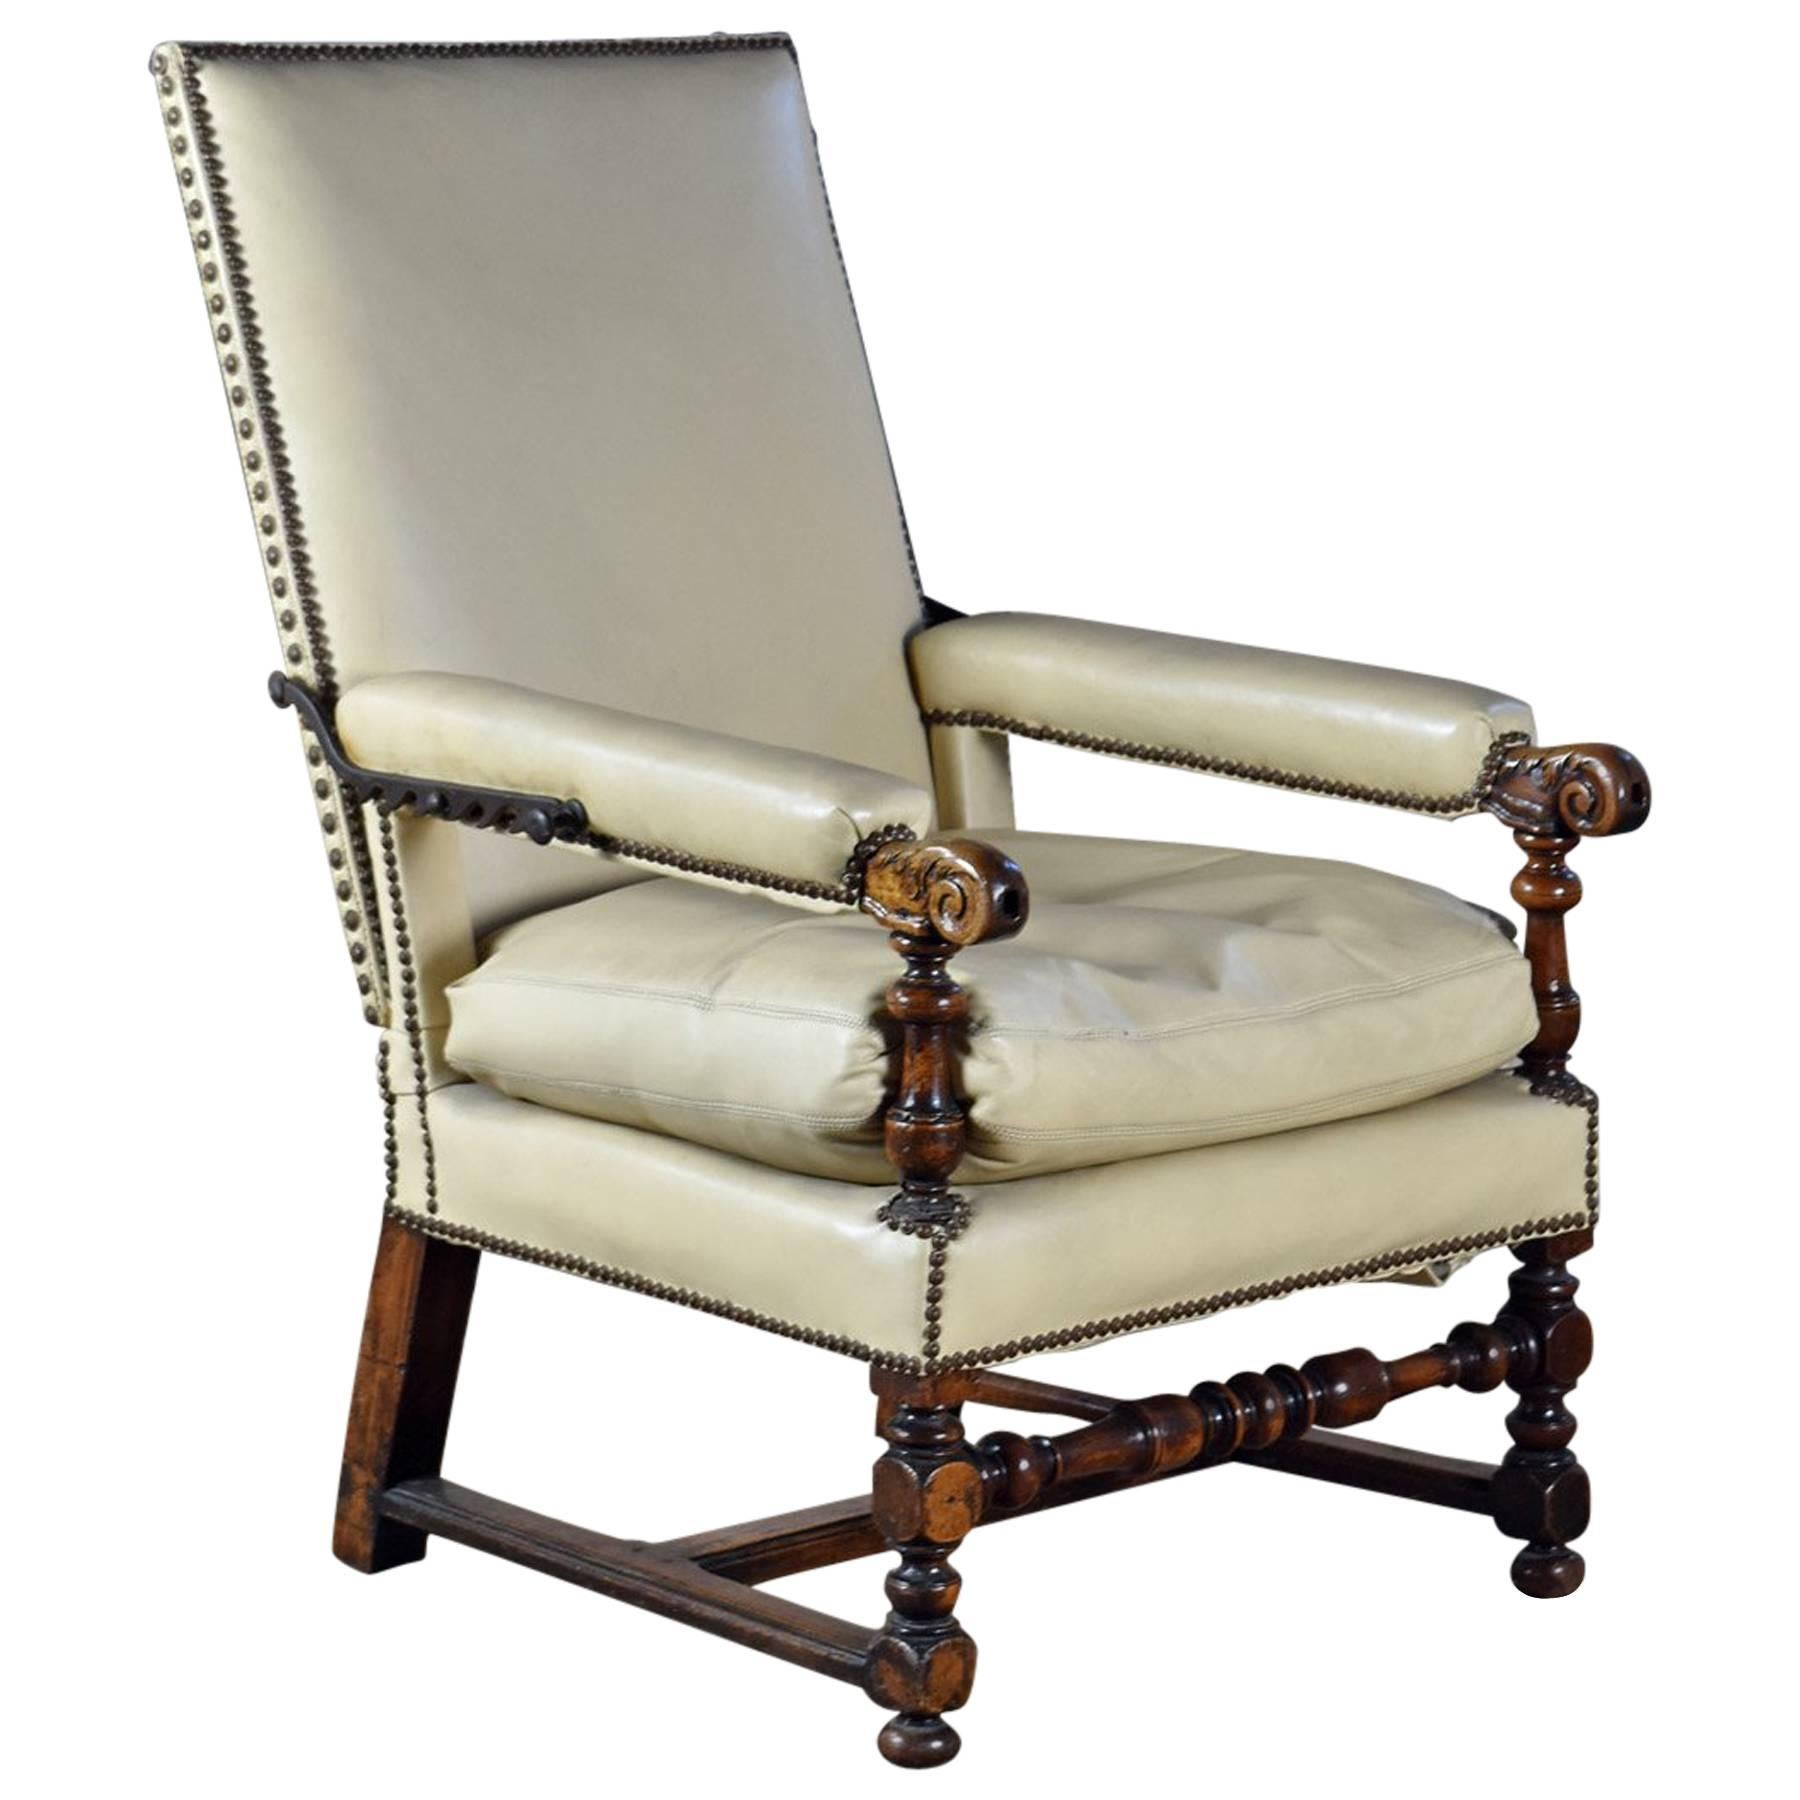 French 17th Century Walnut and Leather Covered Reclining or Ratchet Chair